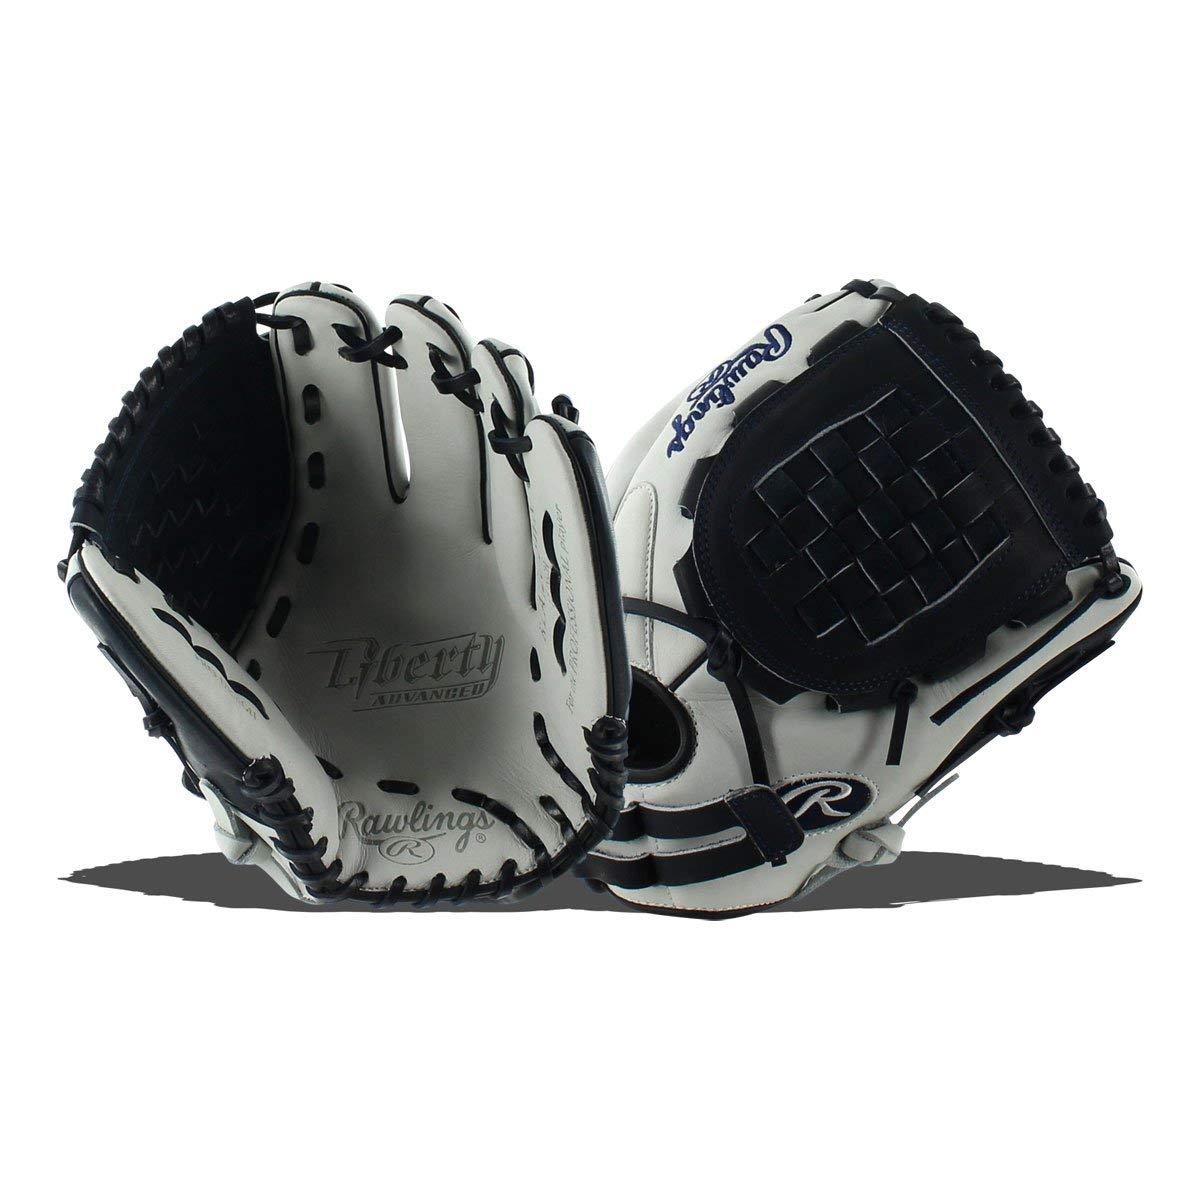 rawlings-liberty-advanced-rla120-3wn-fastpitch-softball-glove-12-right-hand-throw RLA120-3WN-RightHandThrow Rawlings 083321435348 Limited Edition Color Series - White/Navy Colorway 12 Inch Womens Model